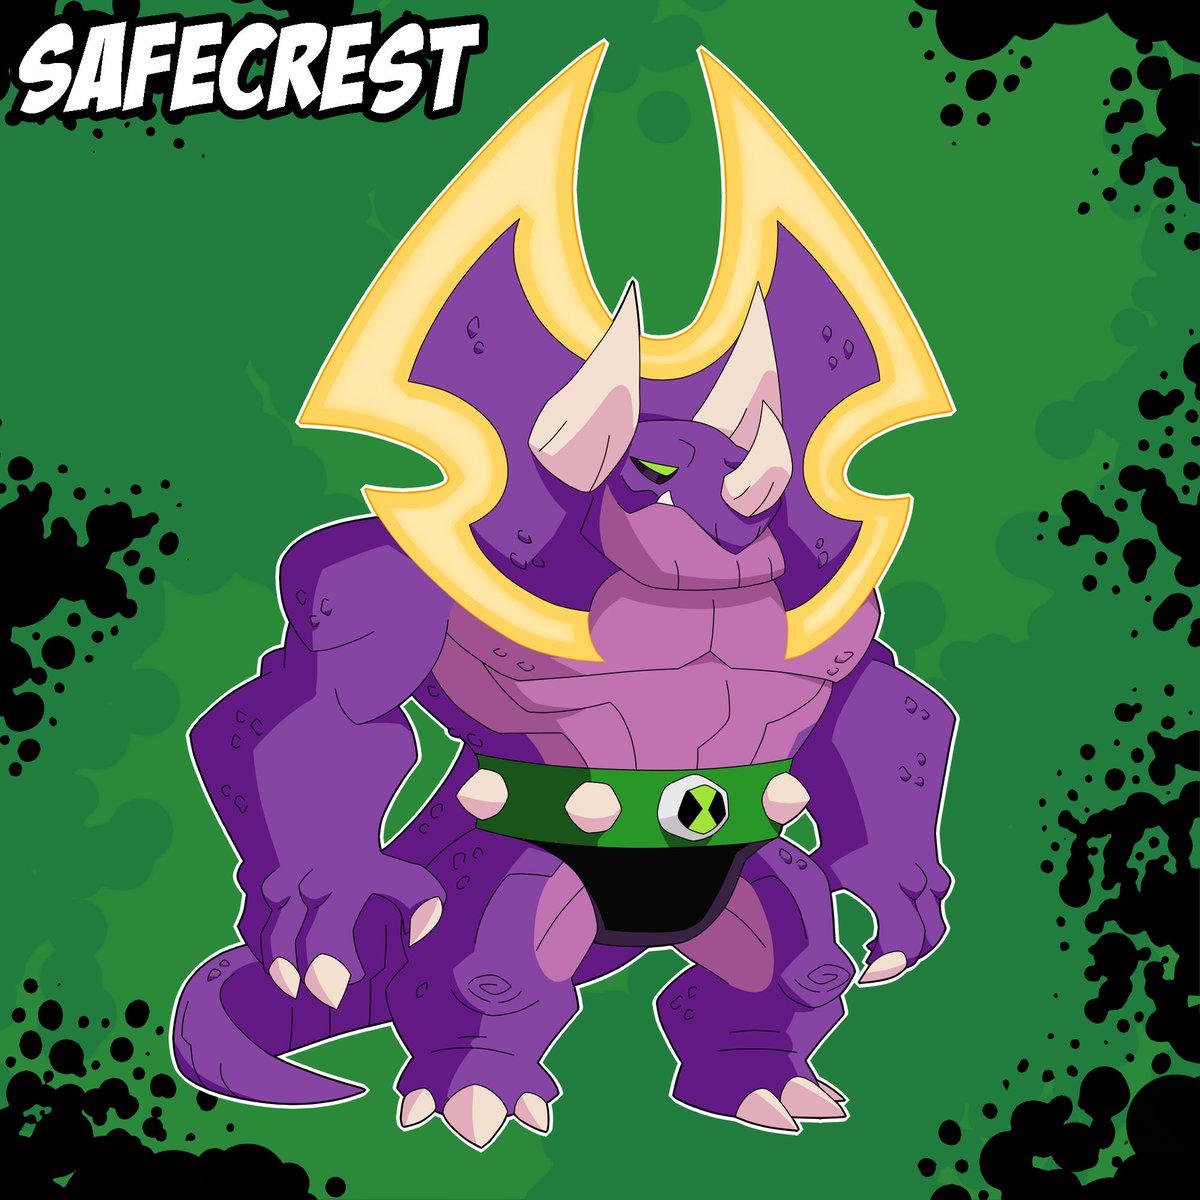 The Shield of Justice!! 🛡🛡

Safecrest is the DNA sample of a Verndasaurian

Coming from the planet Terradino, the same planet as Humongosaur and Astrodactyl, Safecrest can project energy shields from its crest, in addition to being very strong!!

#Ben10 #Ben10Art #Ben10fanart